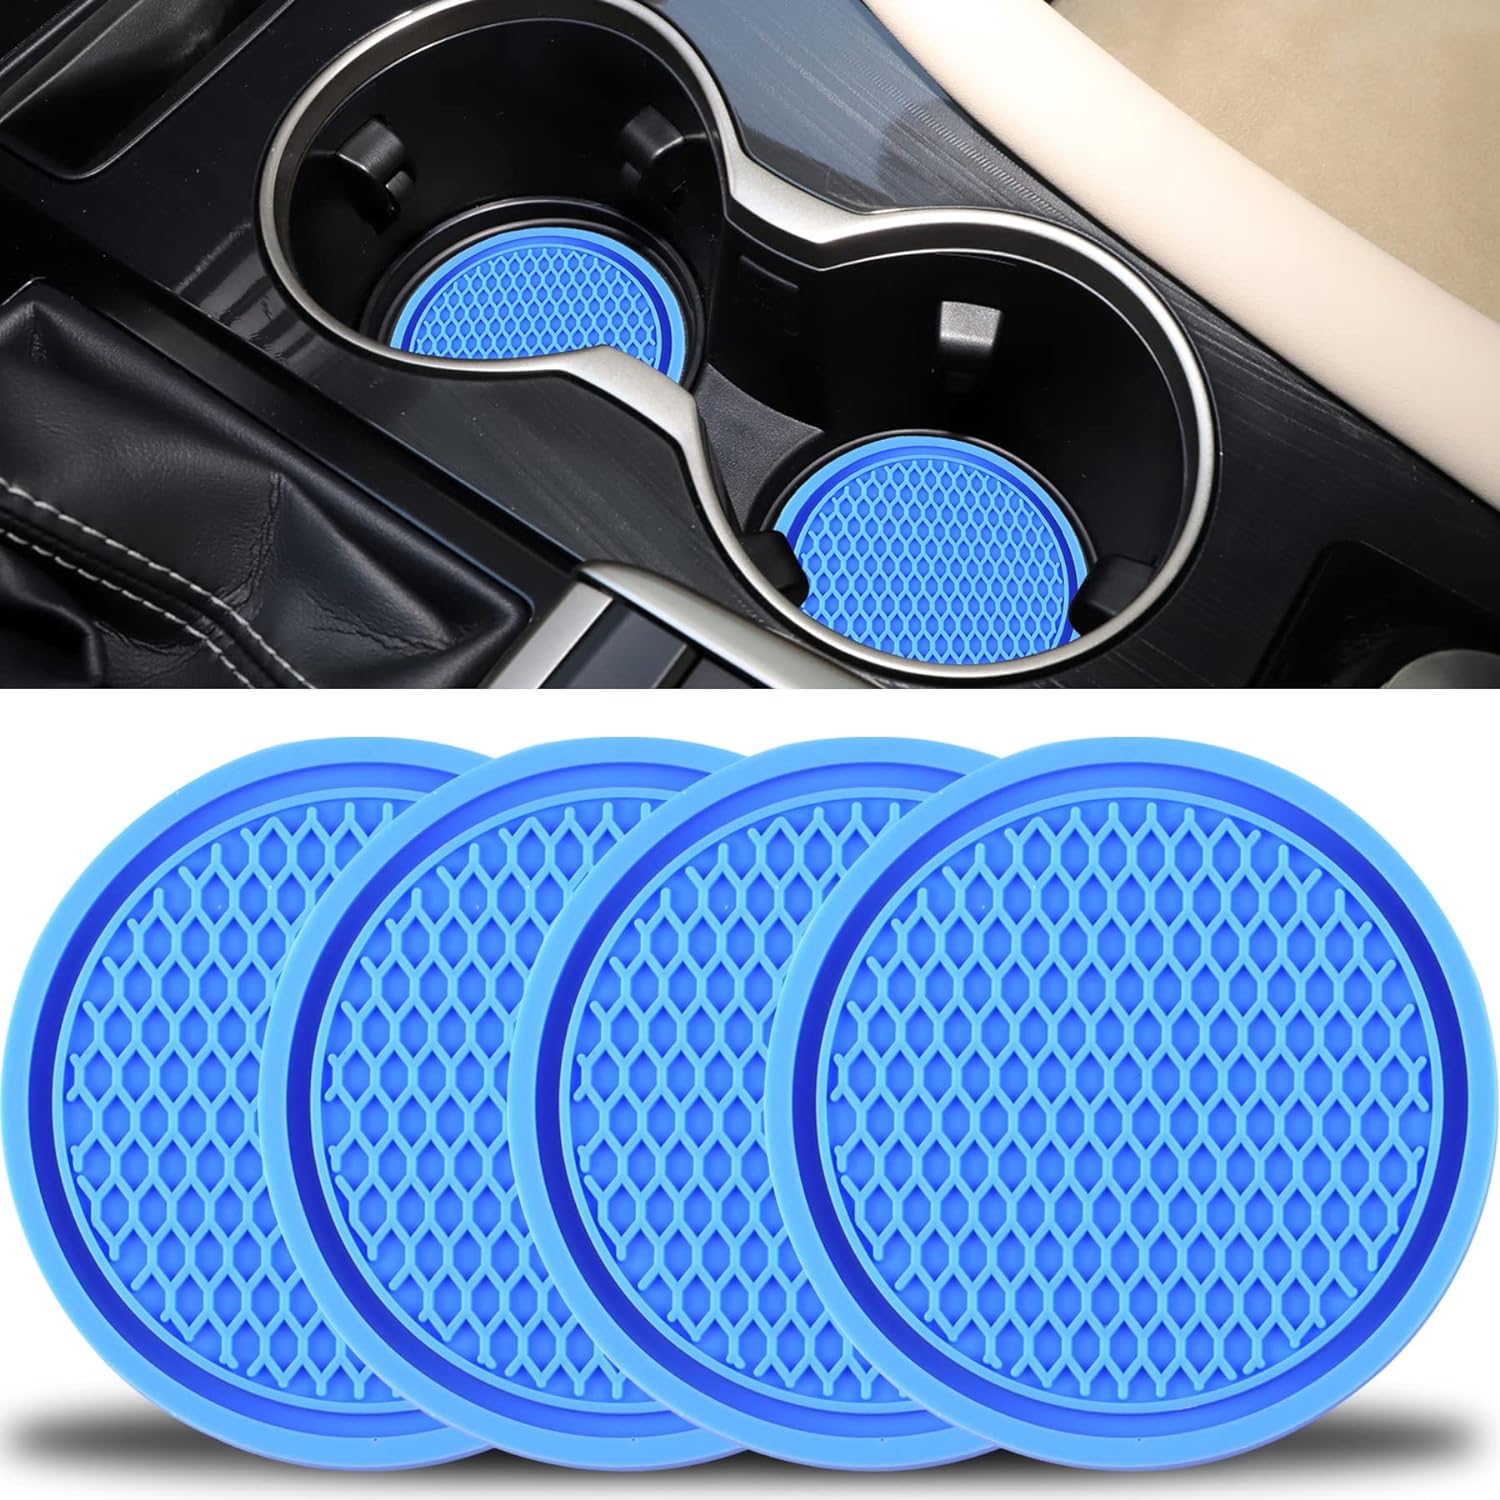 Car Cup Coaster, 2PCS Universal Non-Slip Cup Holders Embedded in Ornaments Coaster, Car Interior Accessories, Blue